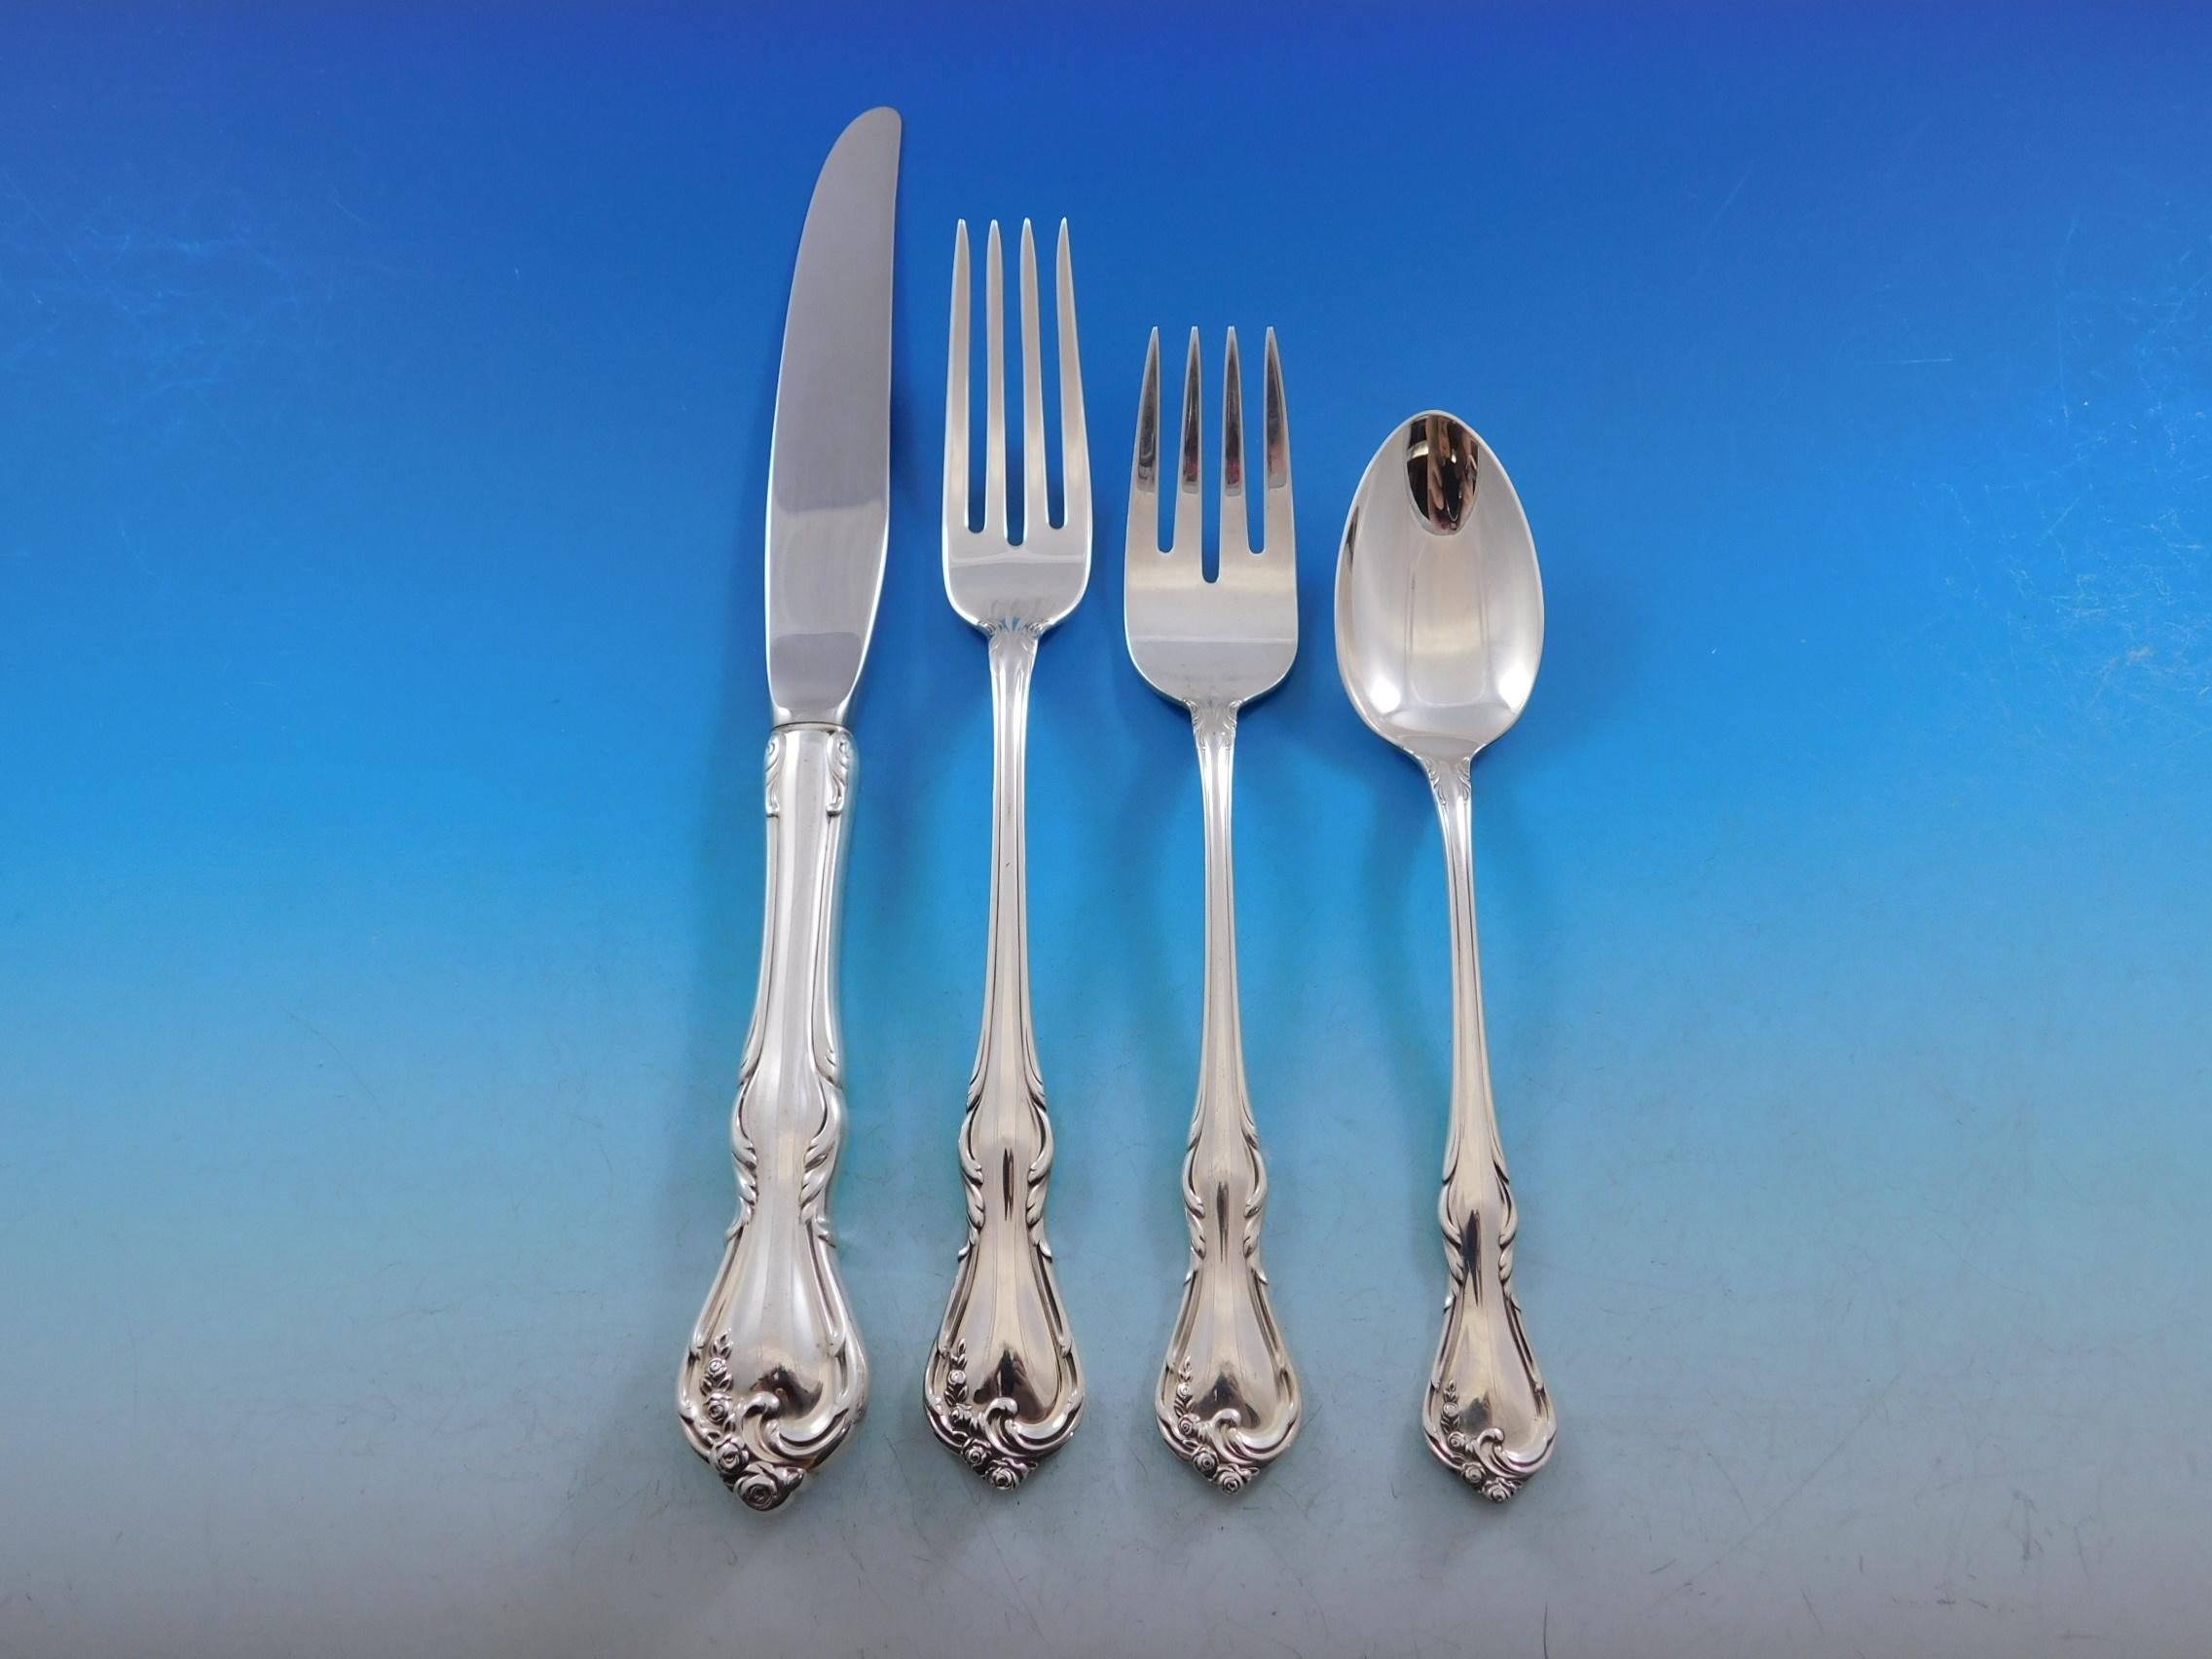 Rose Cascade by Reed & Barton sterling silver flatware set - 81 pieces. This set includes:

12 knives, 9 1/8